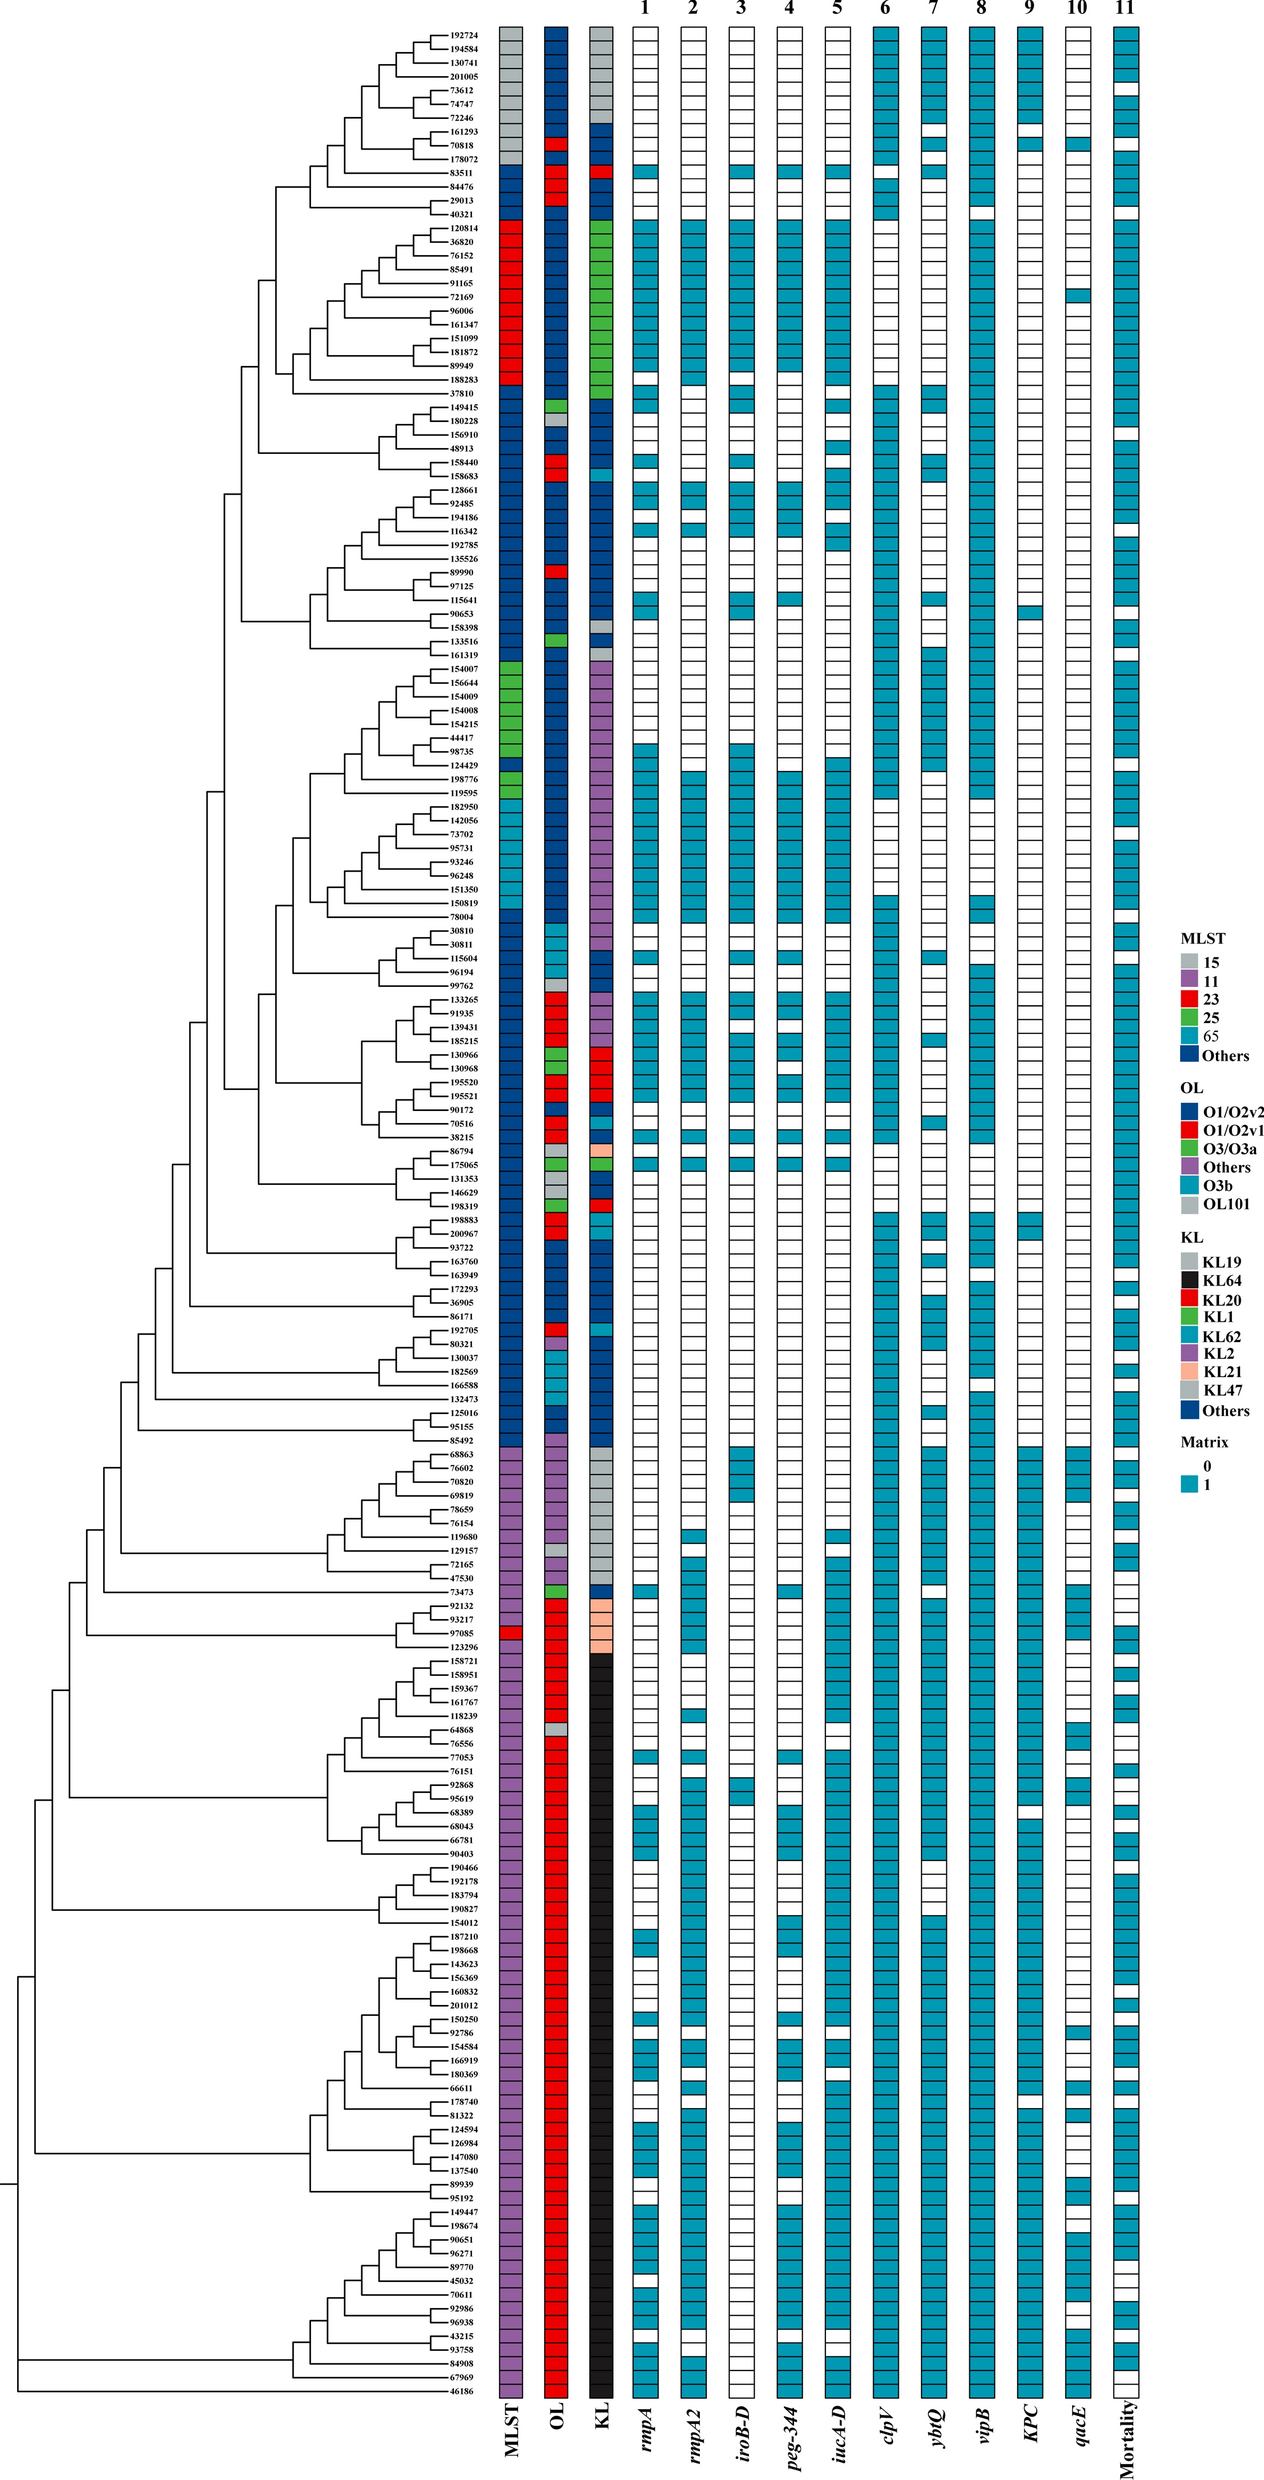 Genomic and immunocyte characterisation of bloodstream infection caused by Klebsiella pneumoniae